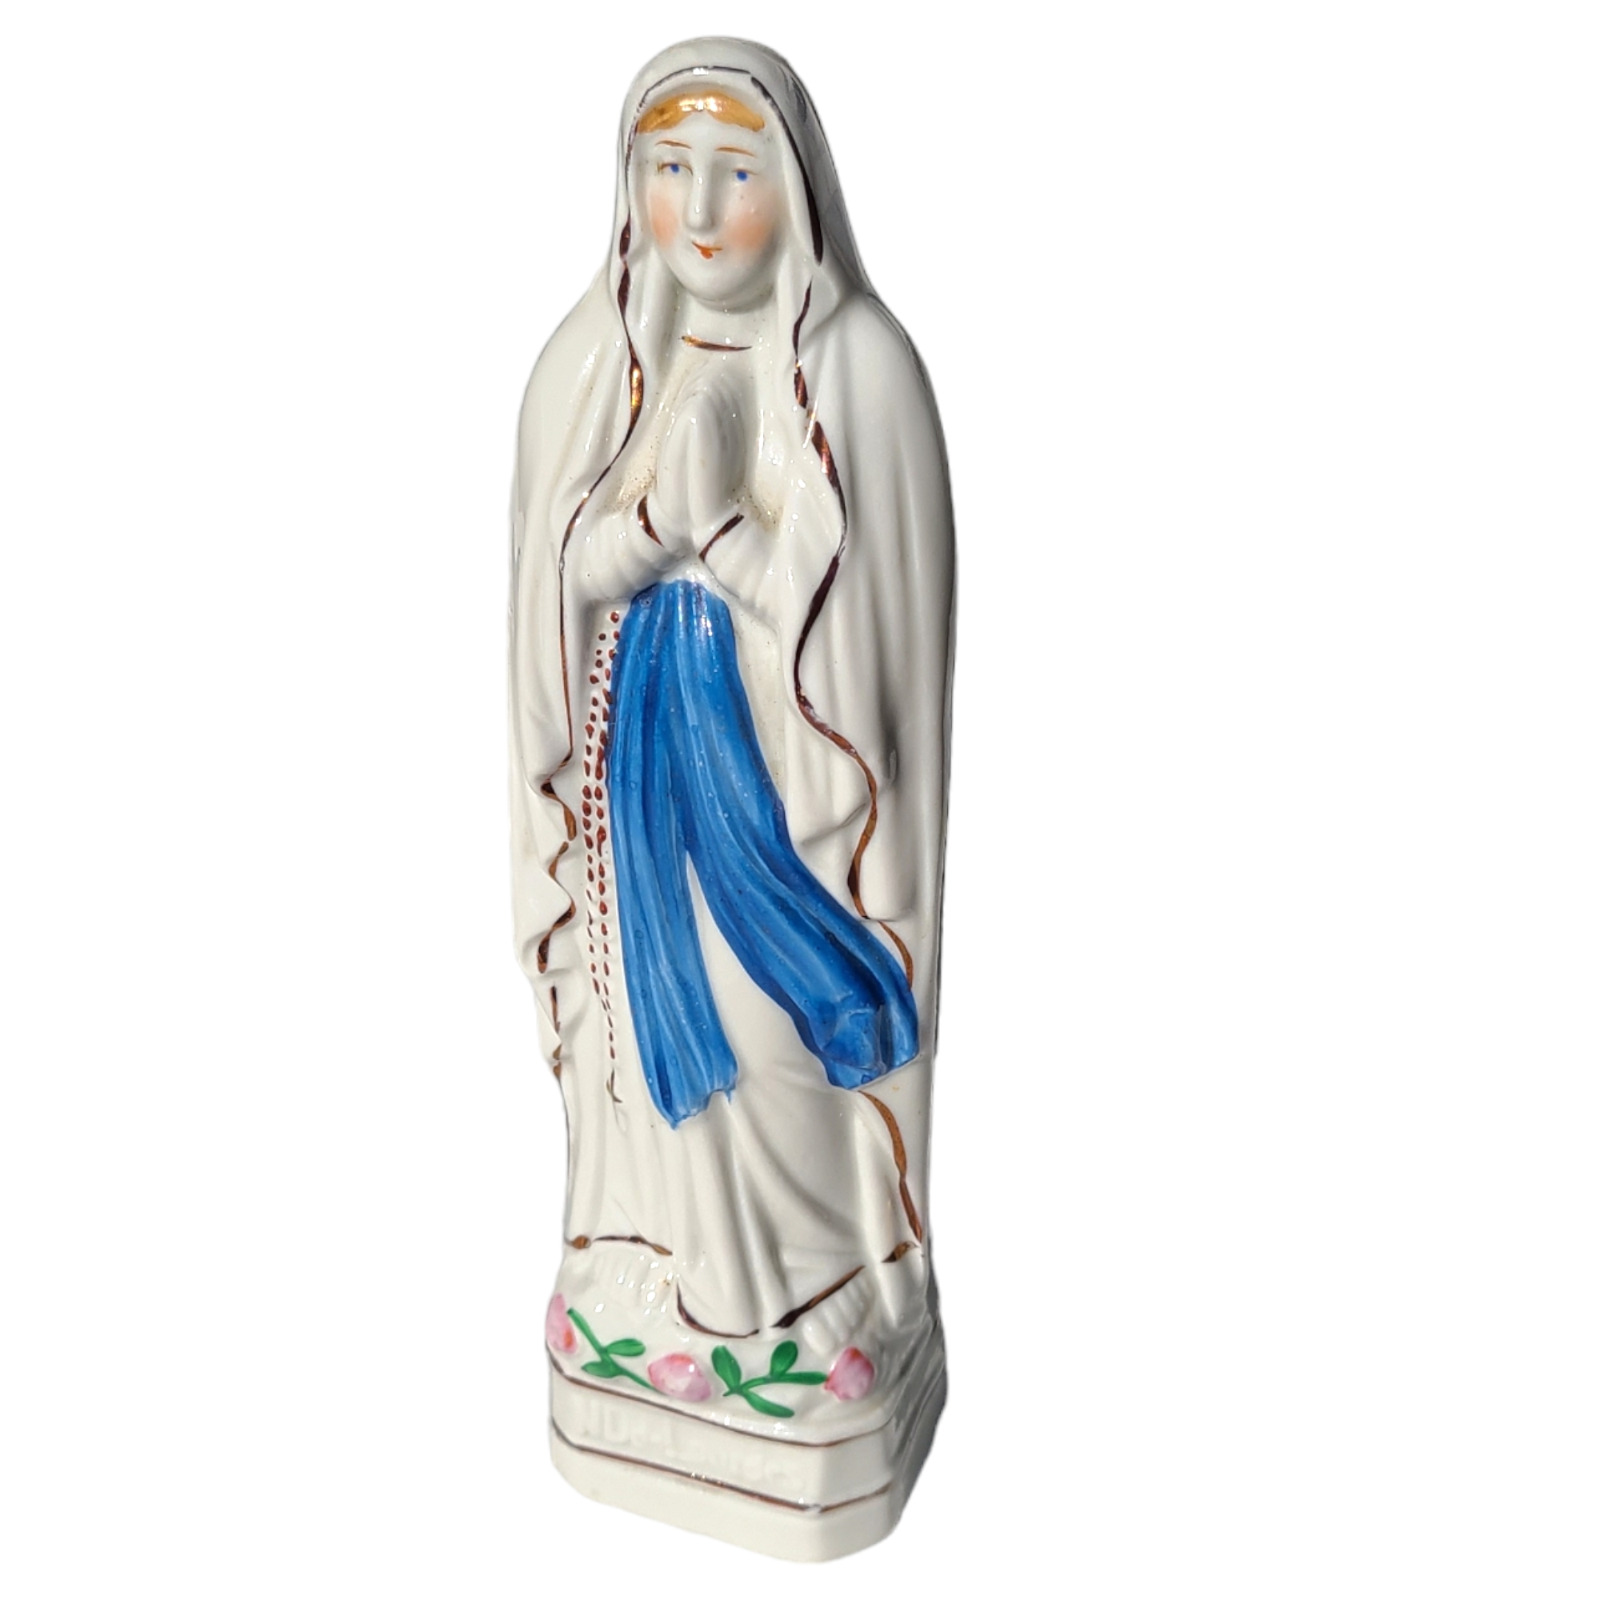 Vintage LADY OF LOURDES Statue Virgin Mary 8 inches Figurine